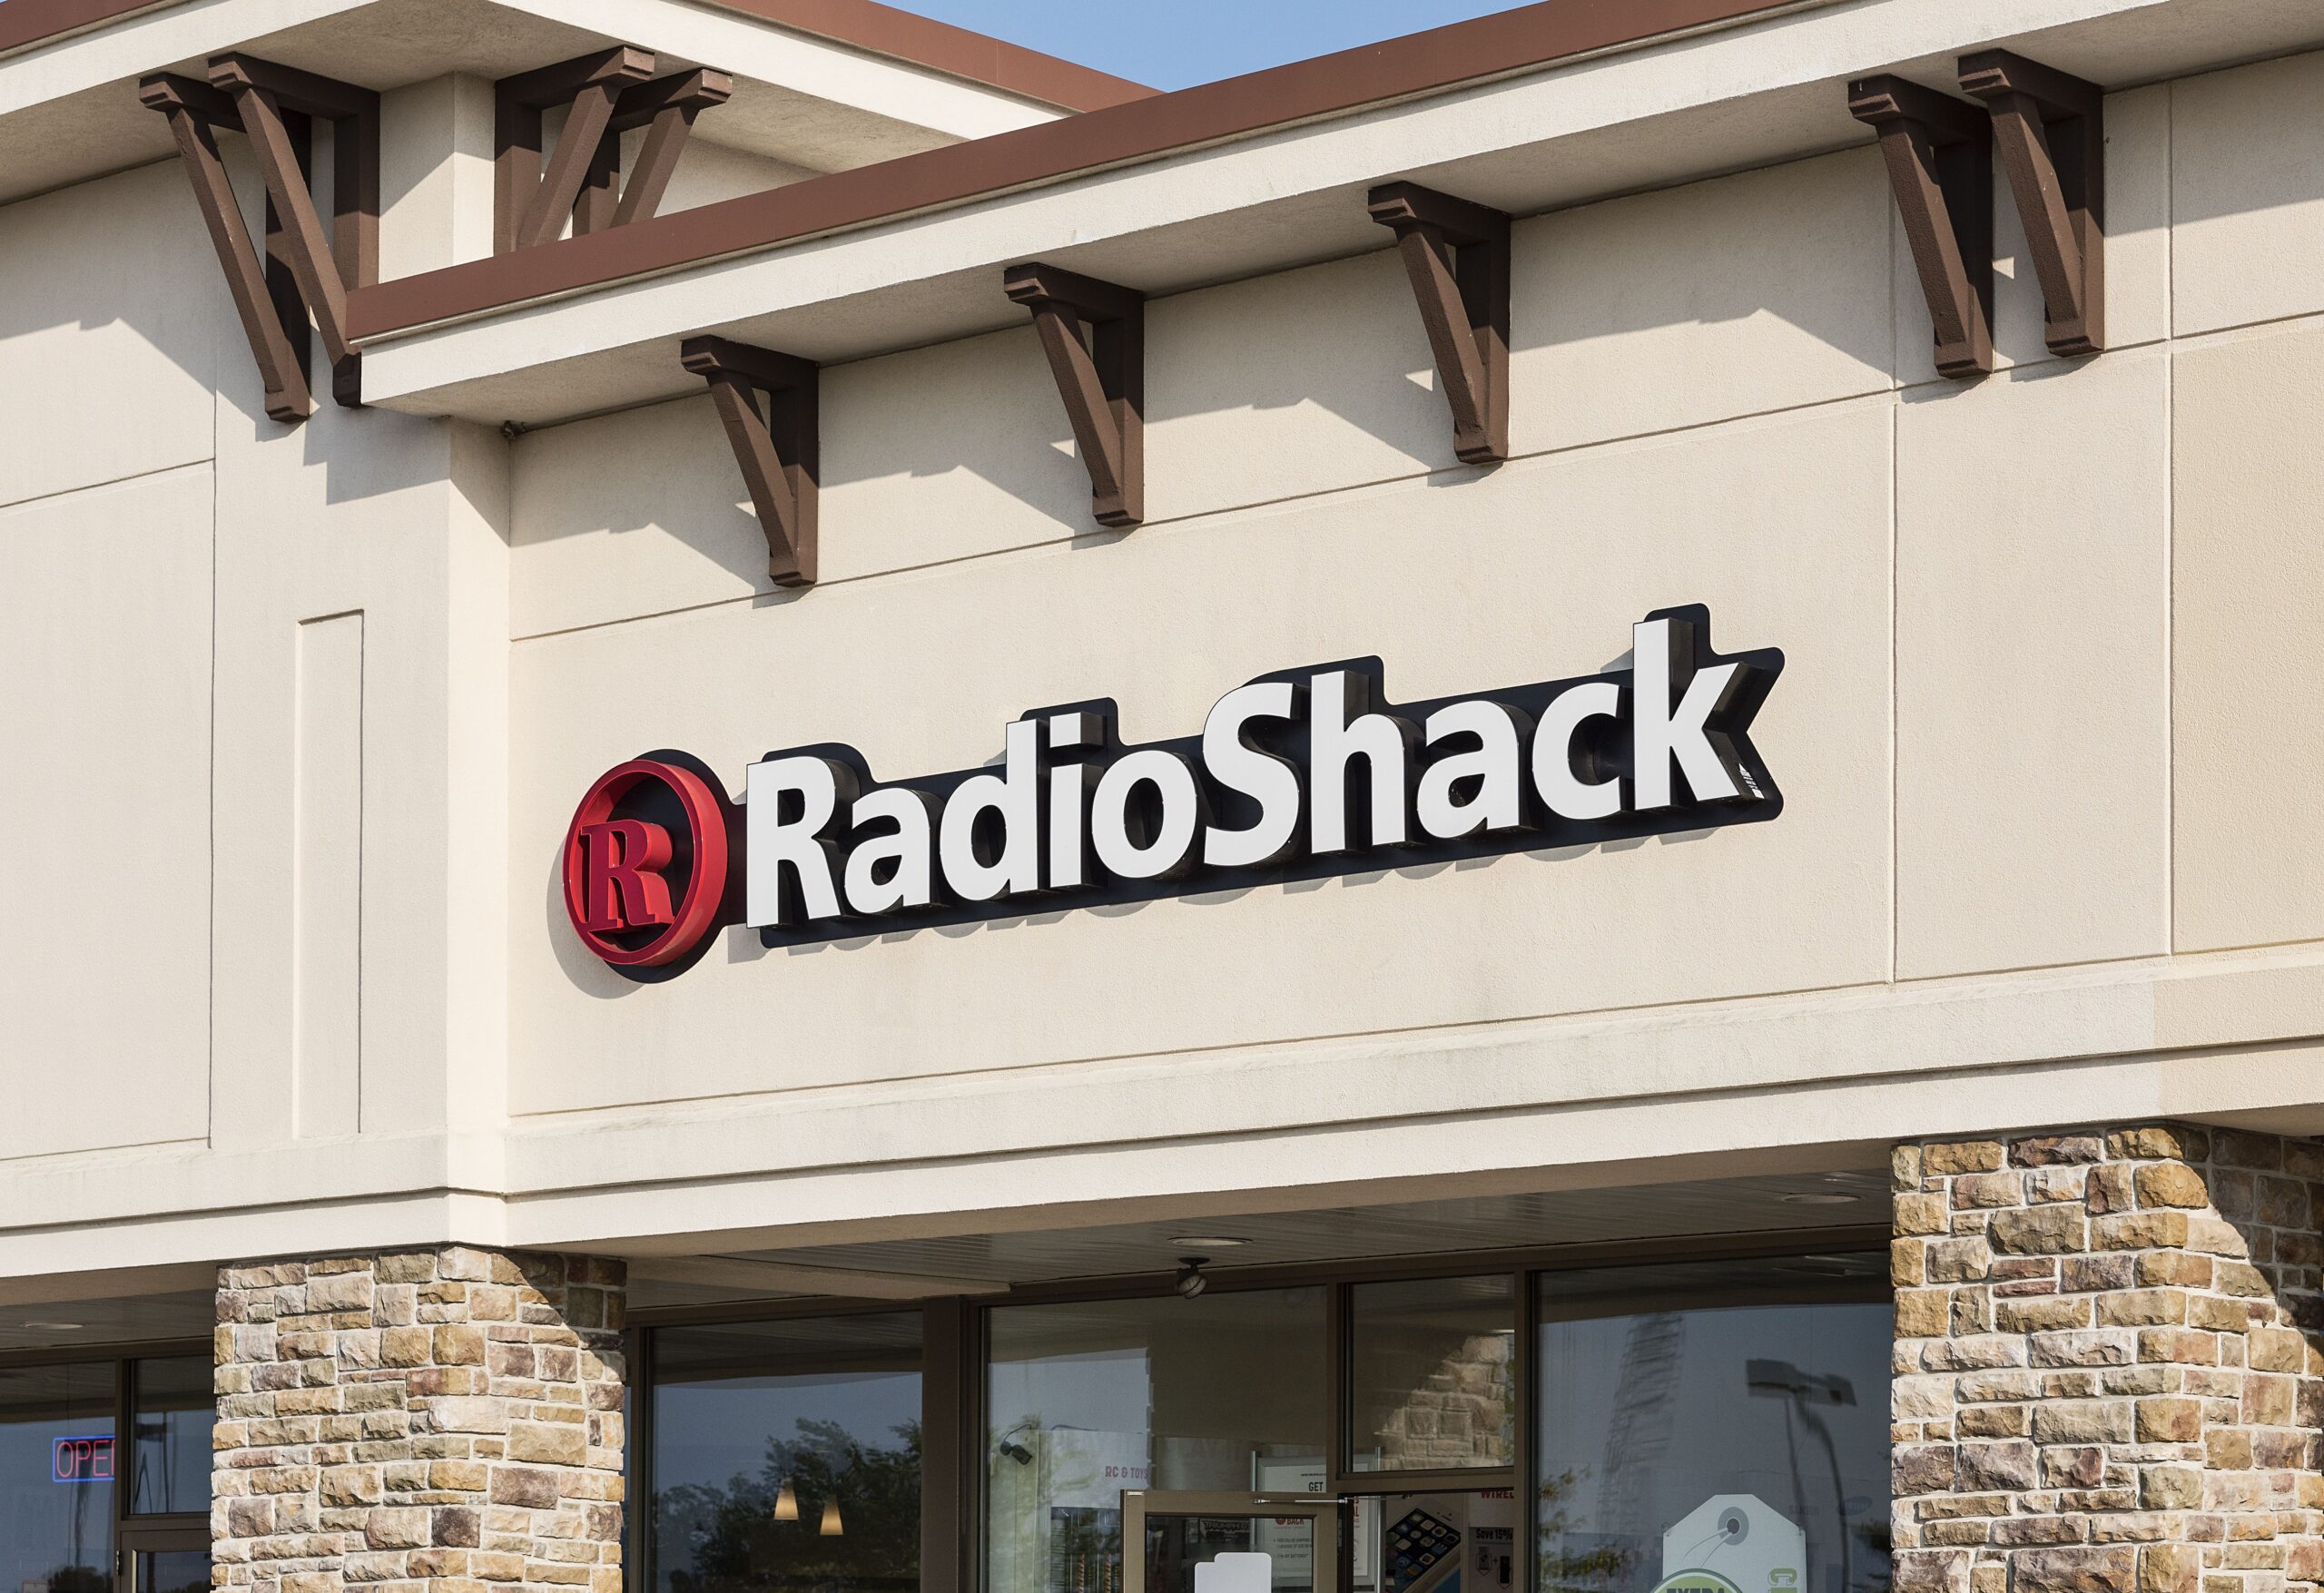 Radio Shack retail store, Mount Laural, New Jersey, USA